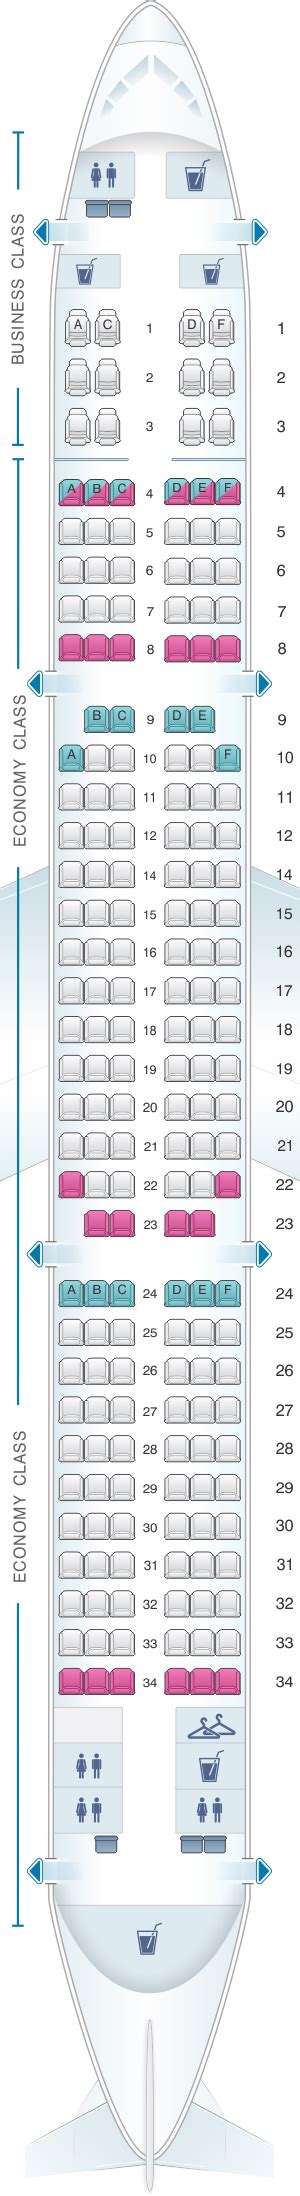 Seat Map Turkish Airlines Airbus A Allegiant Air Airline Hot